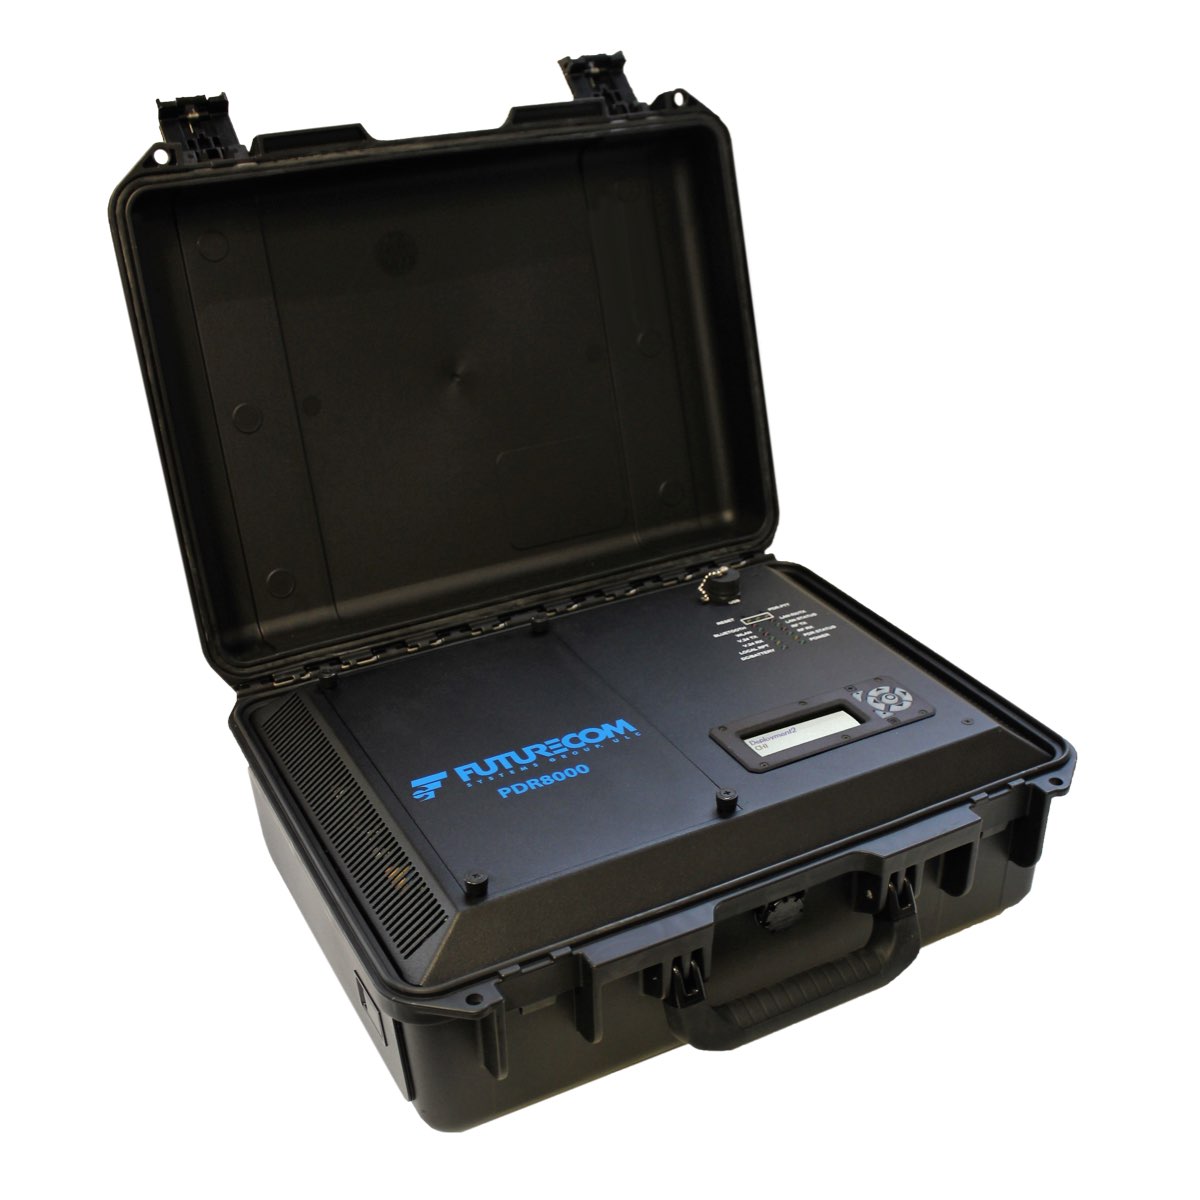 PDR8000® Portable Digital Repeater